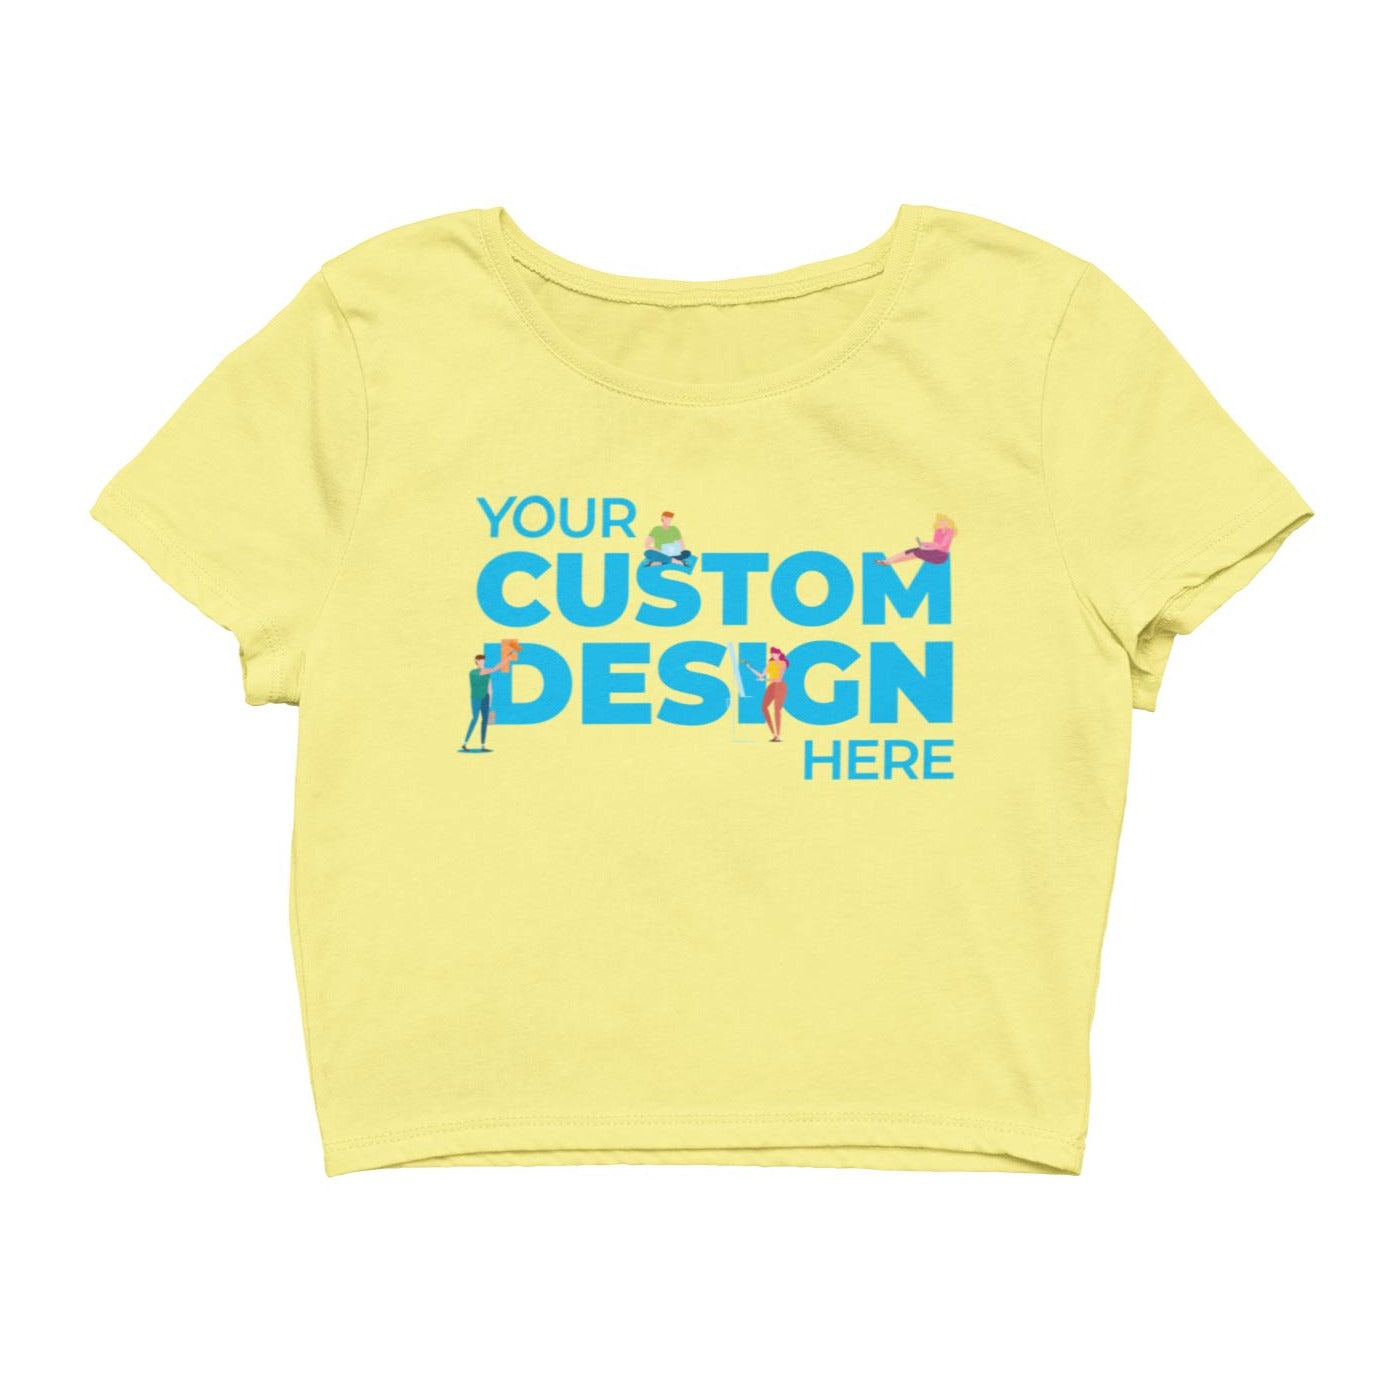 beige custom customizable personalized your logo image crop tops by the banyan tee plain black crop top crop tops india crop tops for girls